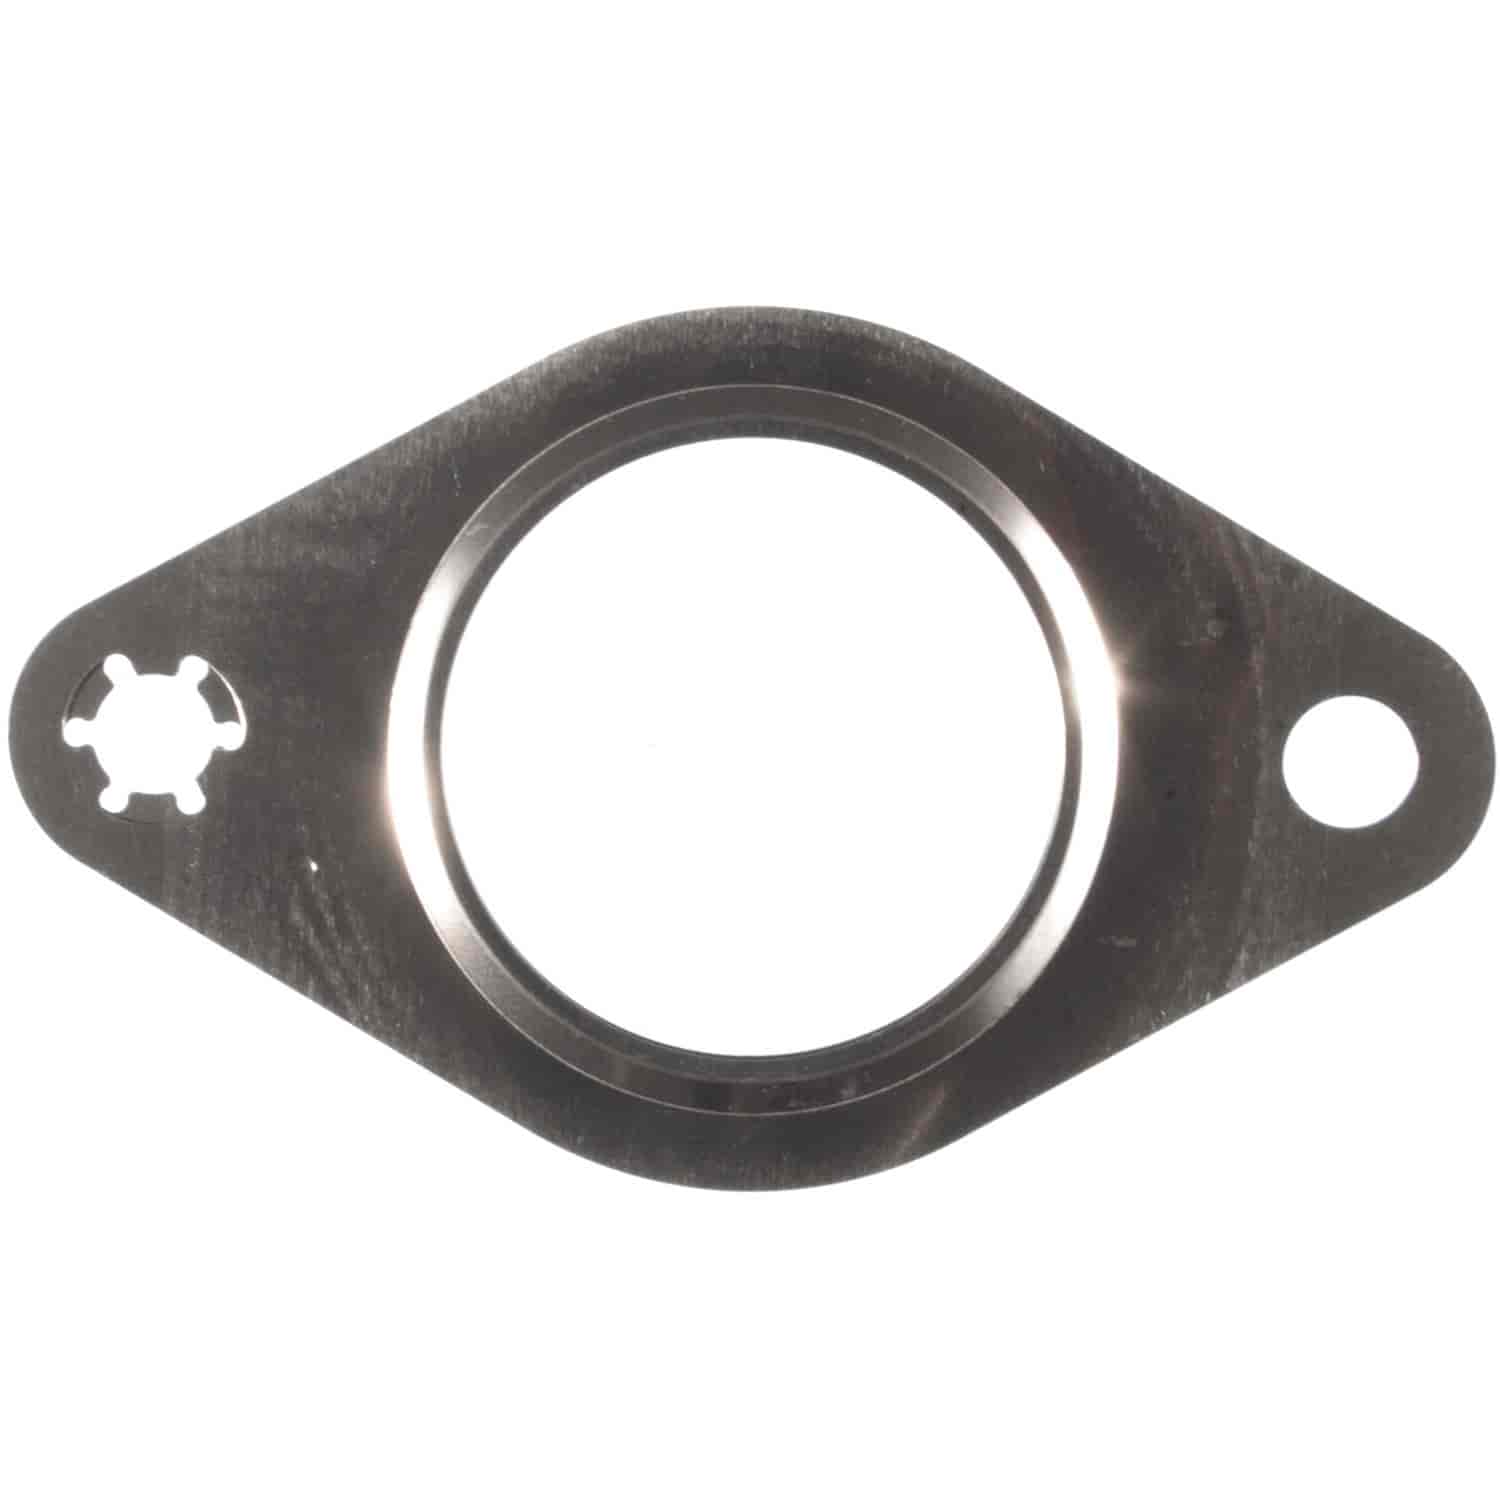 Exhaust Pipe Gasket Ford 2.0L Zetec Engines 2001-2004